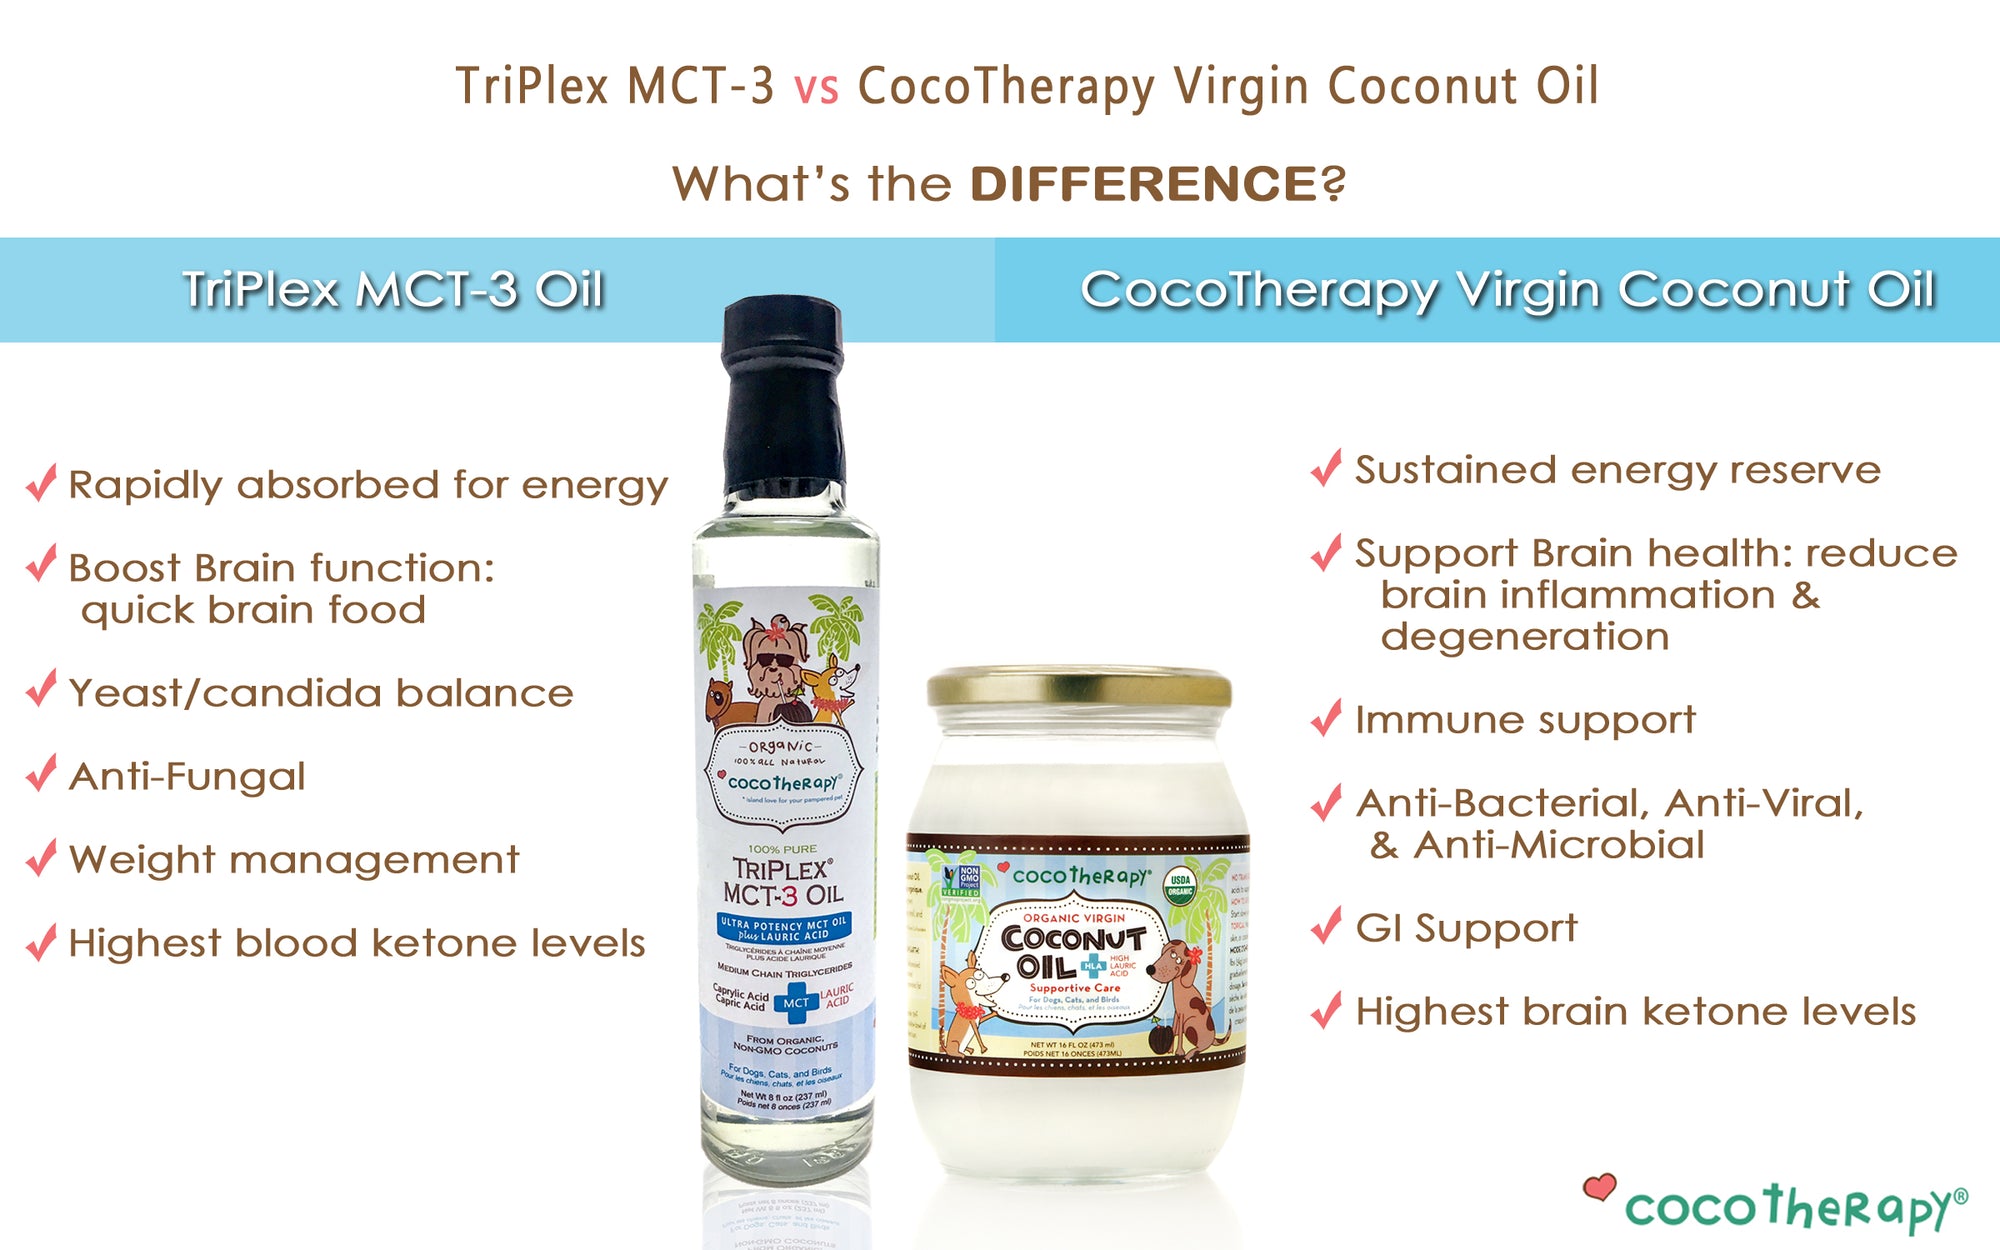 What's the Difference Between CocoTherapy® Organic Virgin Coconut Oil and TriPlex™ MCT-3 Oil?